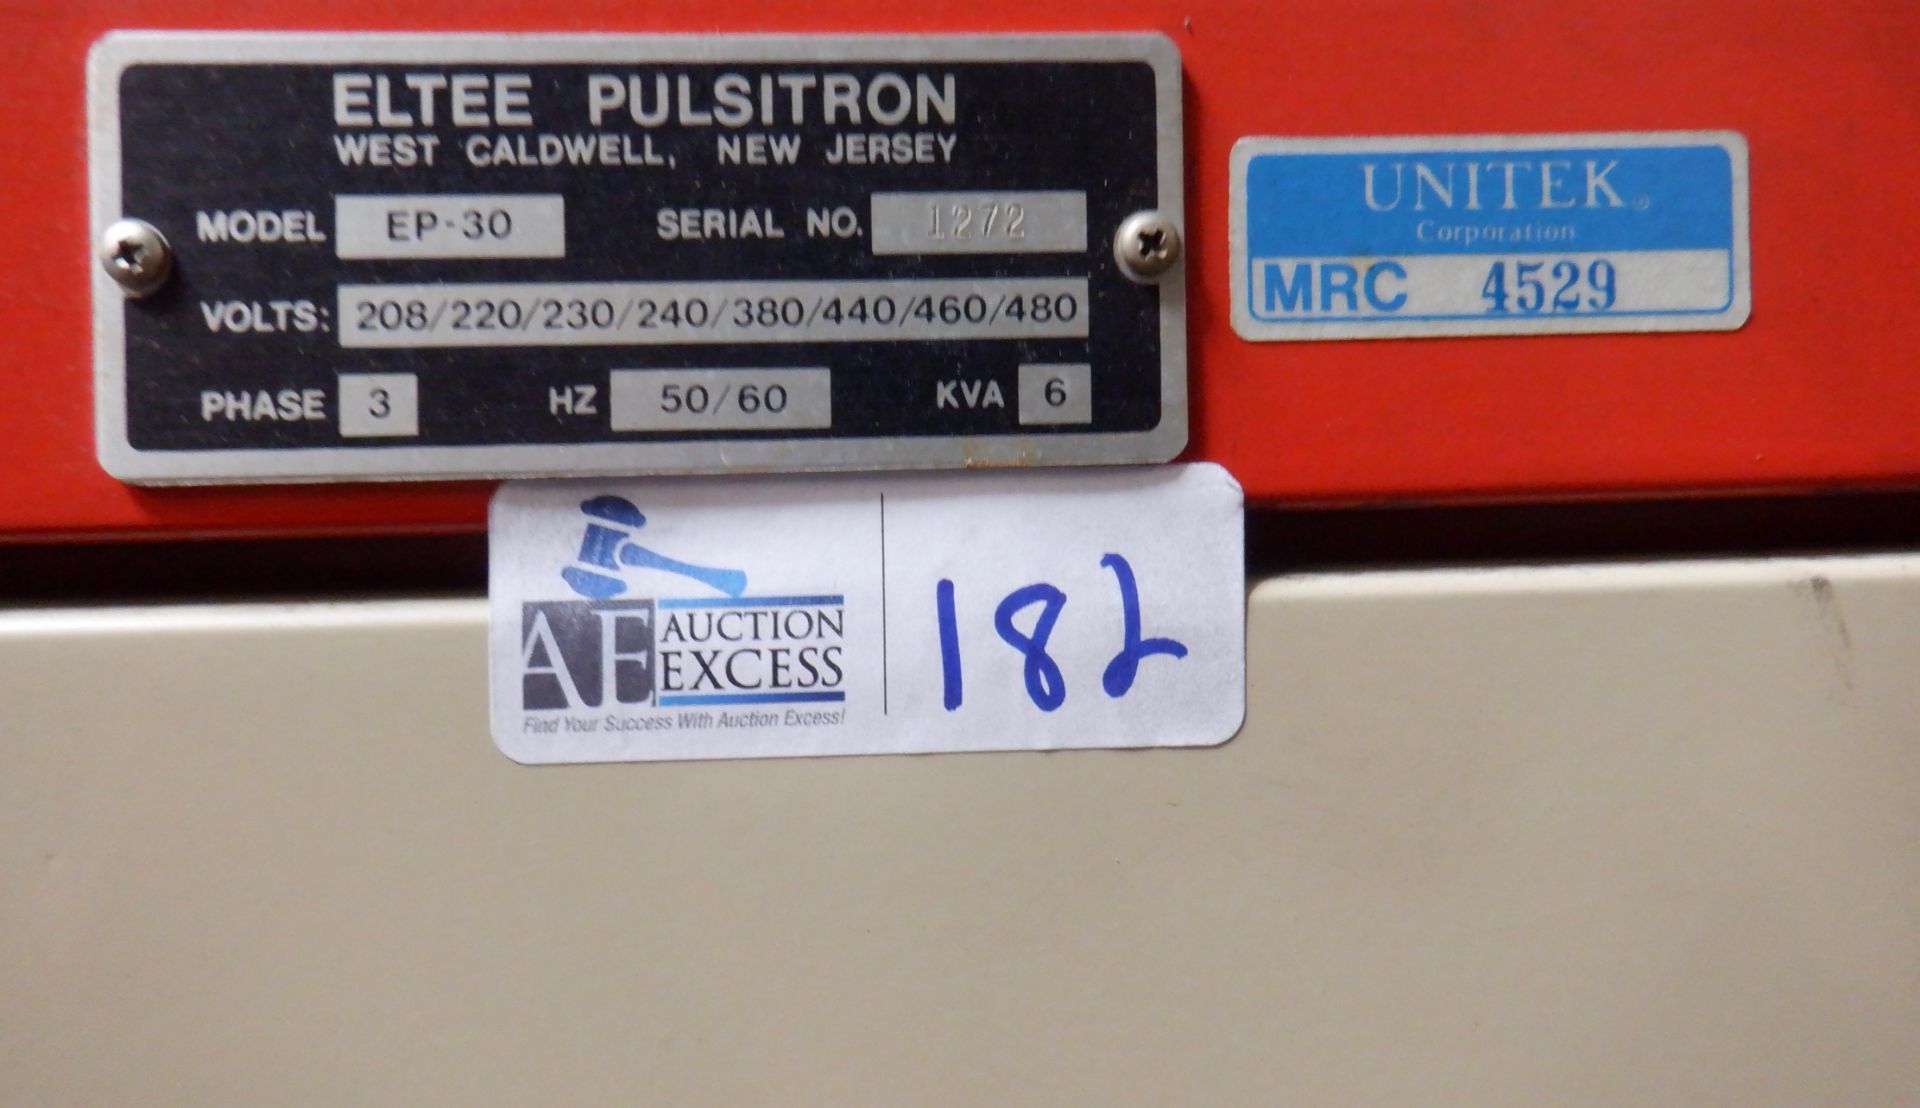 ELTEE PULSITRON EDM MACHINE FOR PARTS AND REPAIR VERY LARGE VERY HEAVY - Image 12 of 30